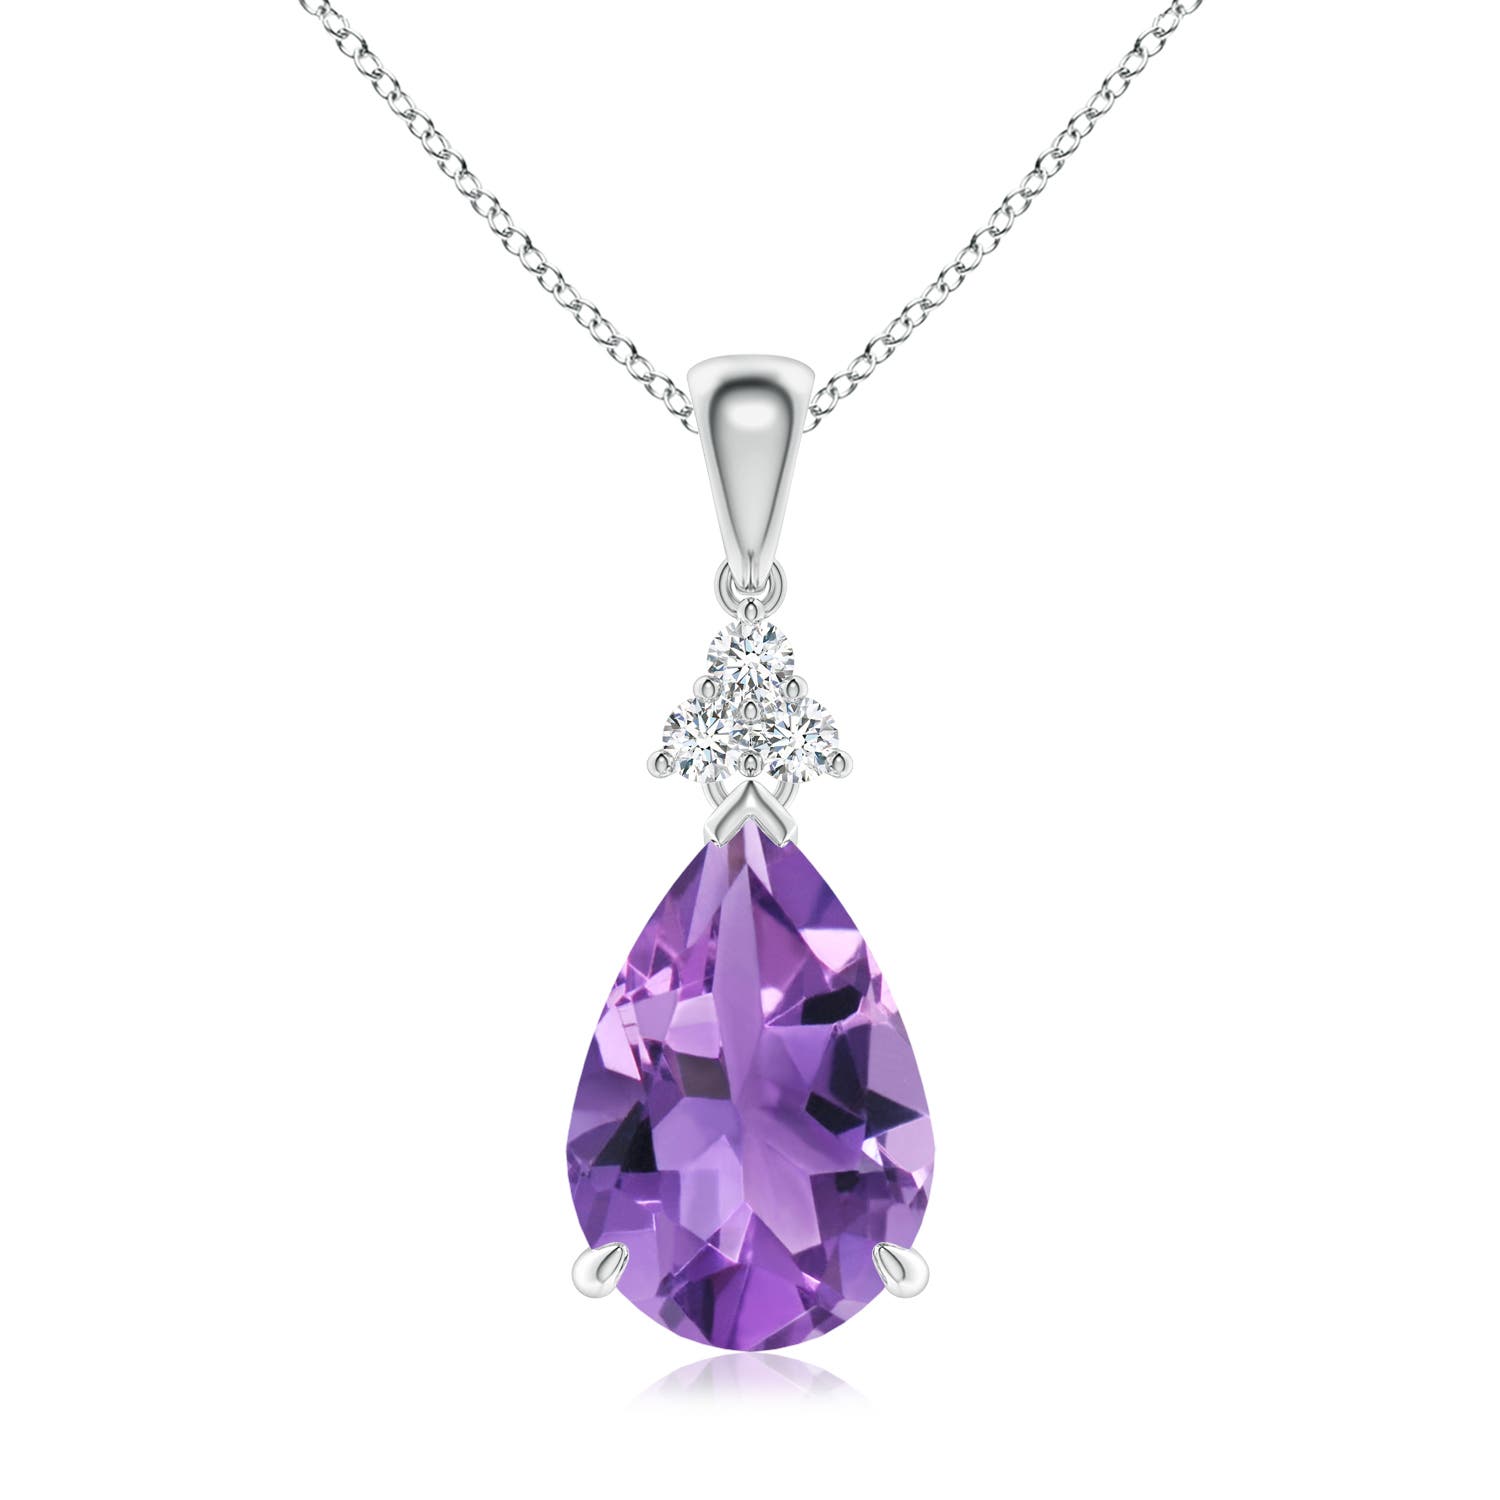 AA - Amethyst / 2.71 CT / 14 KT White Gold